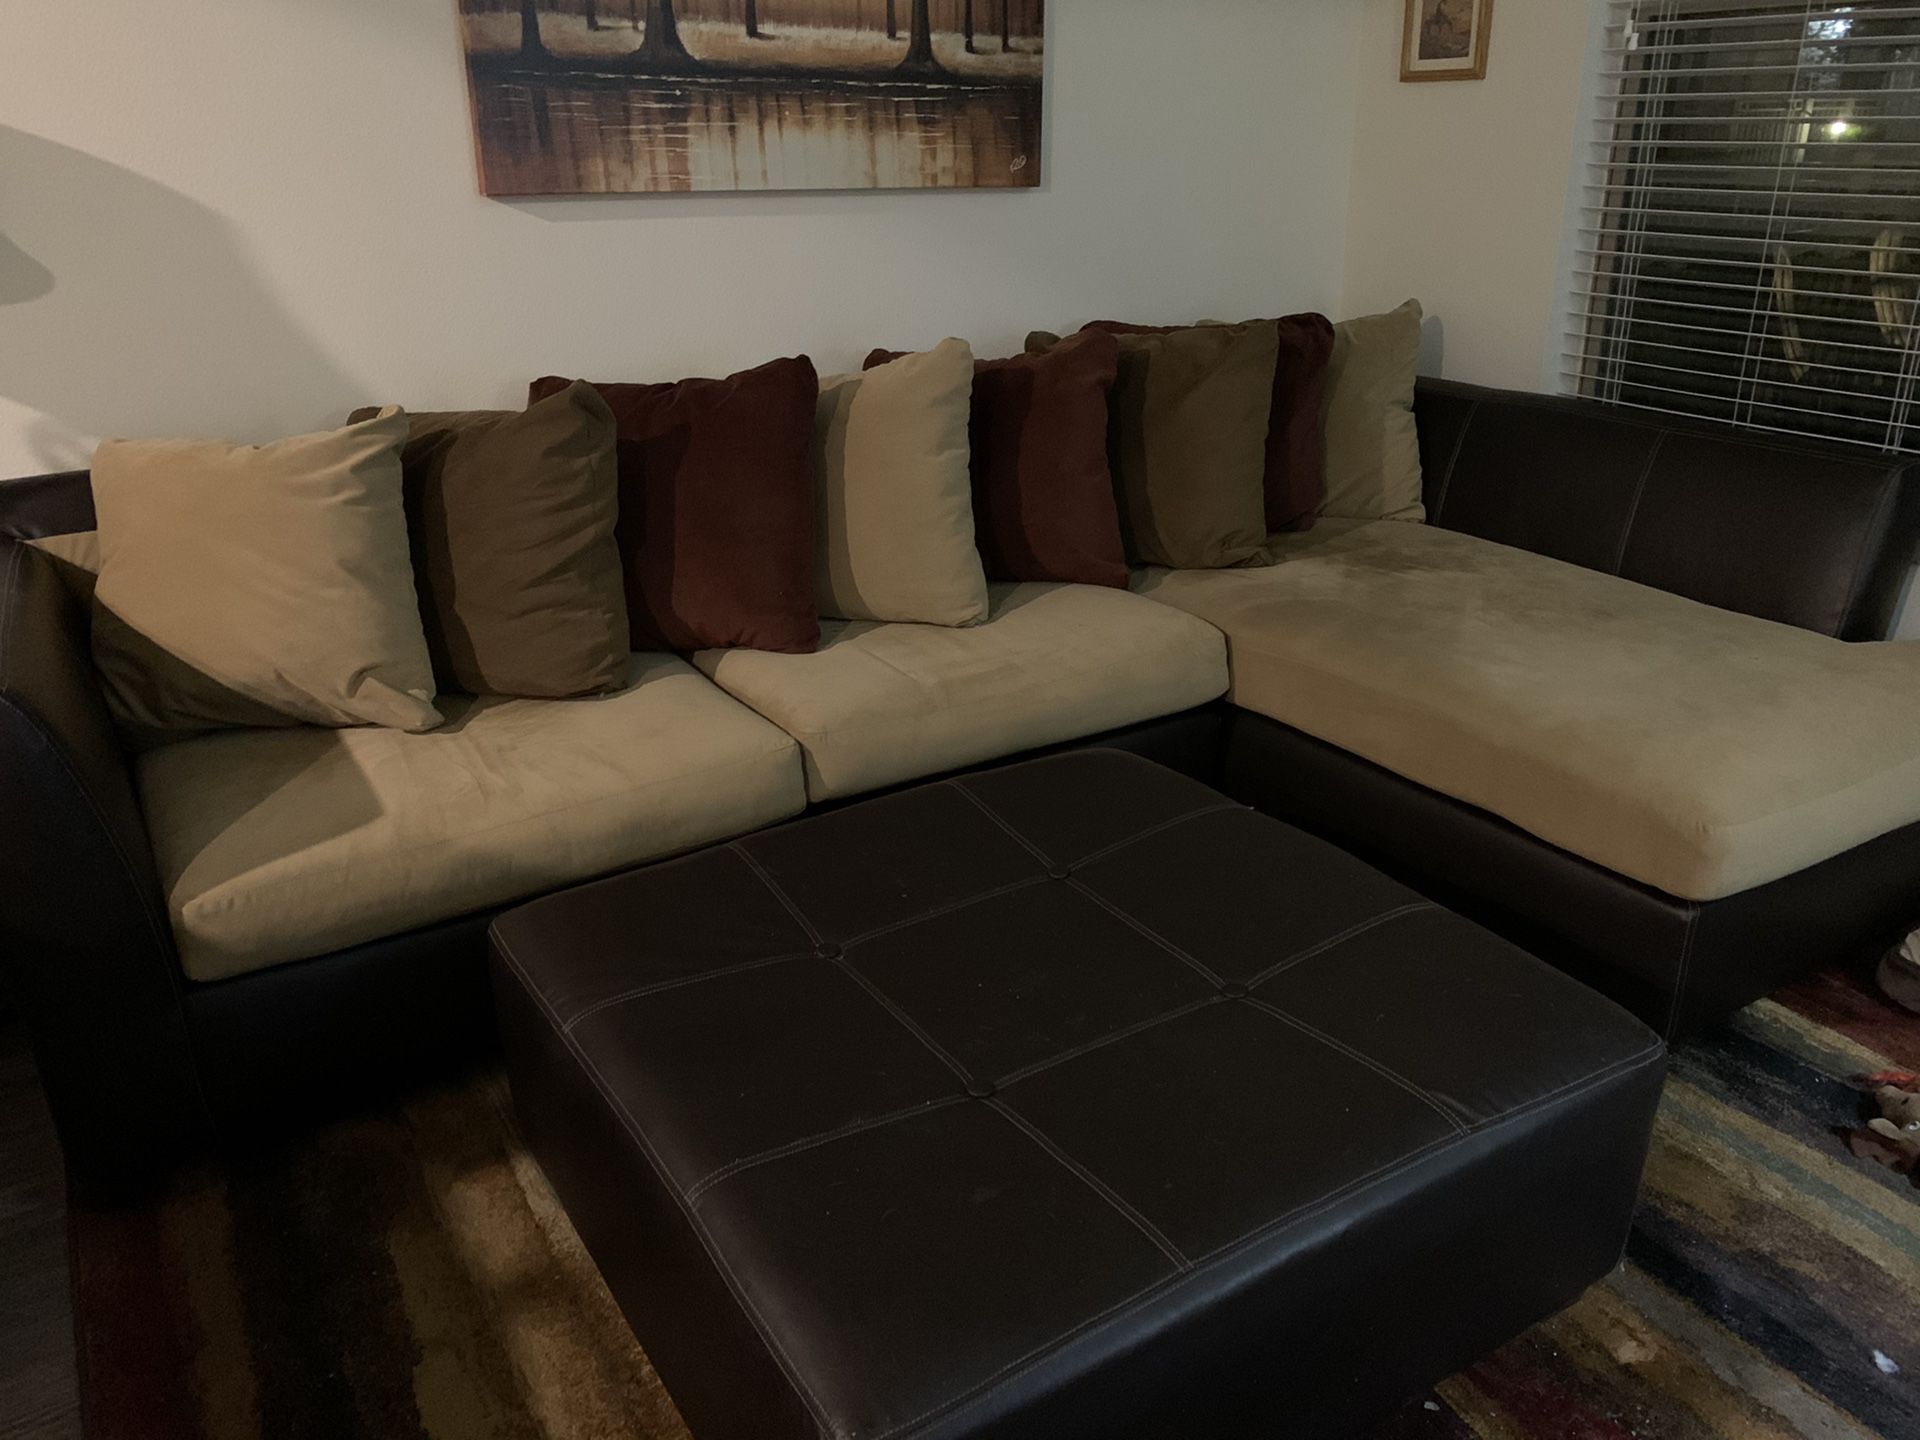 Almost new couch JUST CUT THE PRICE TO $550